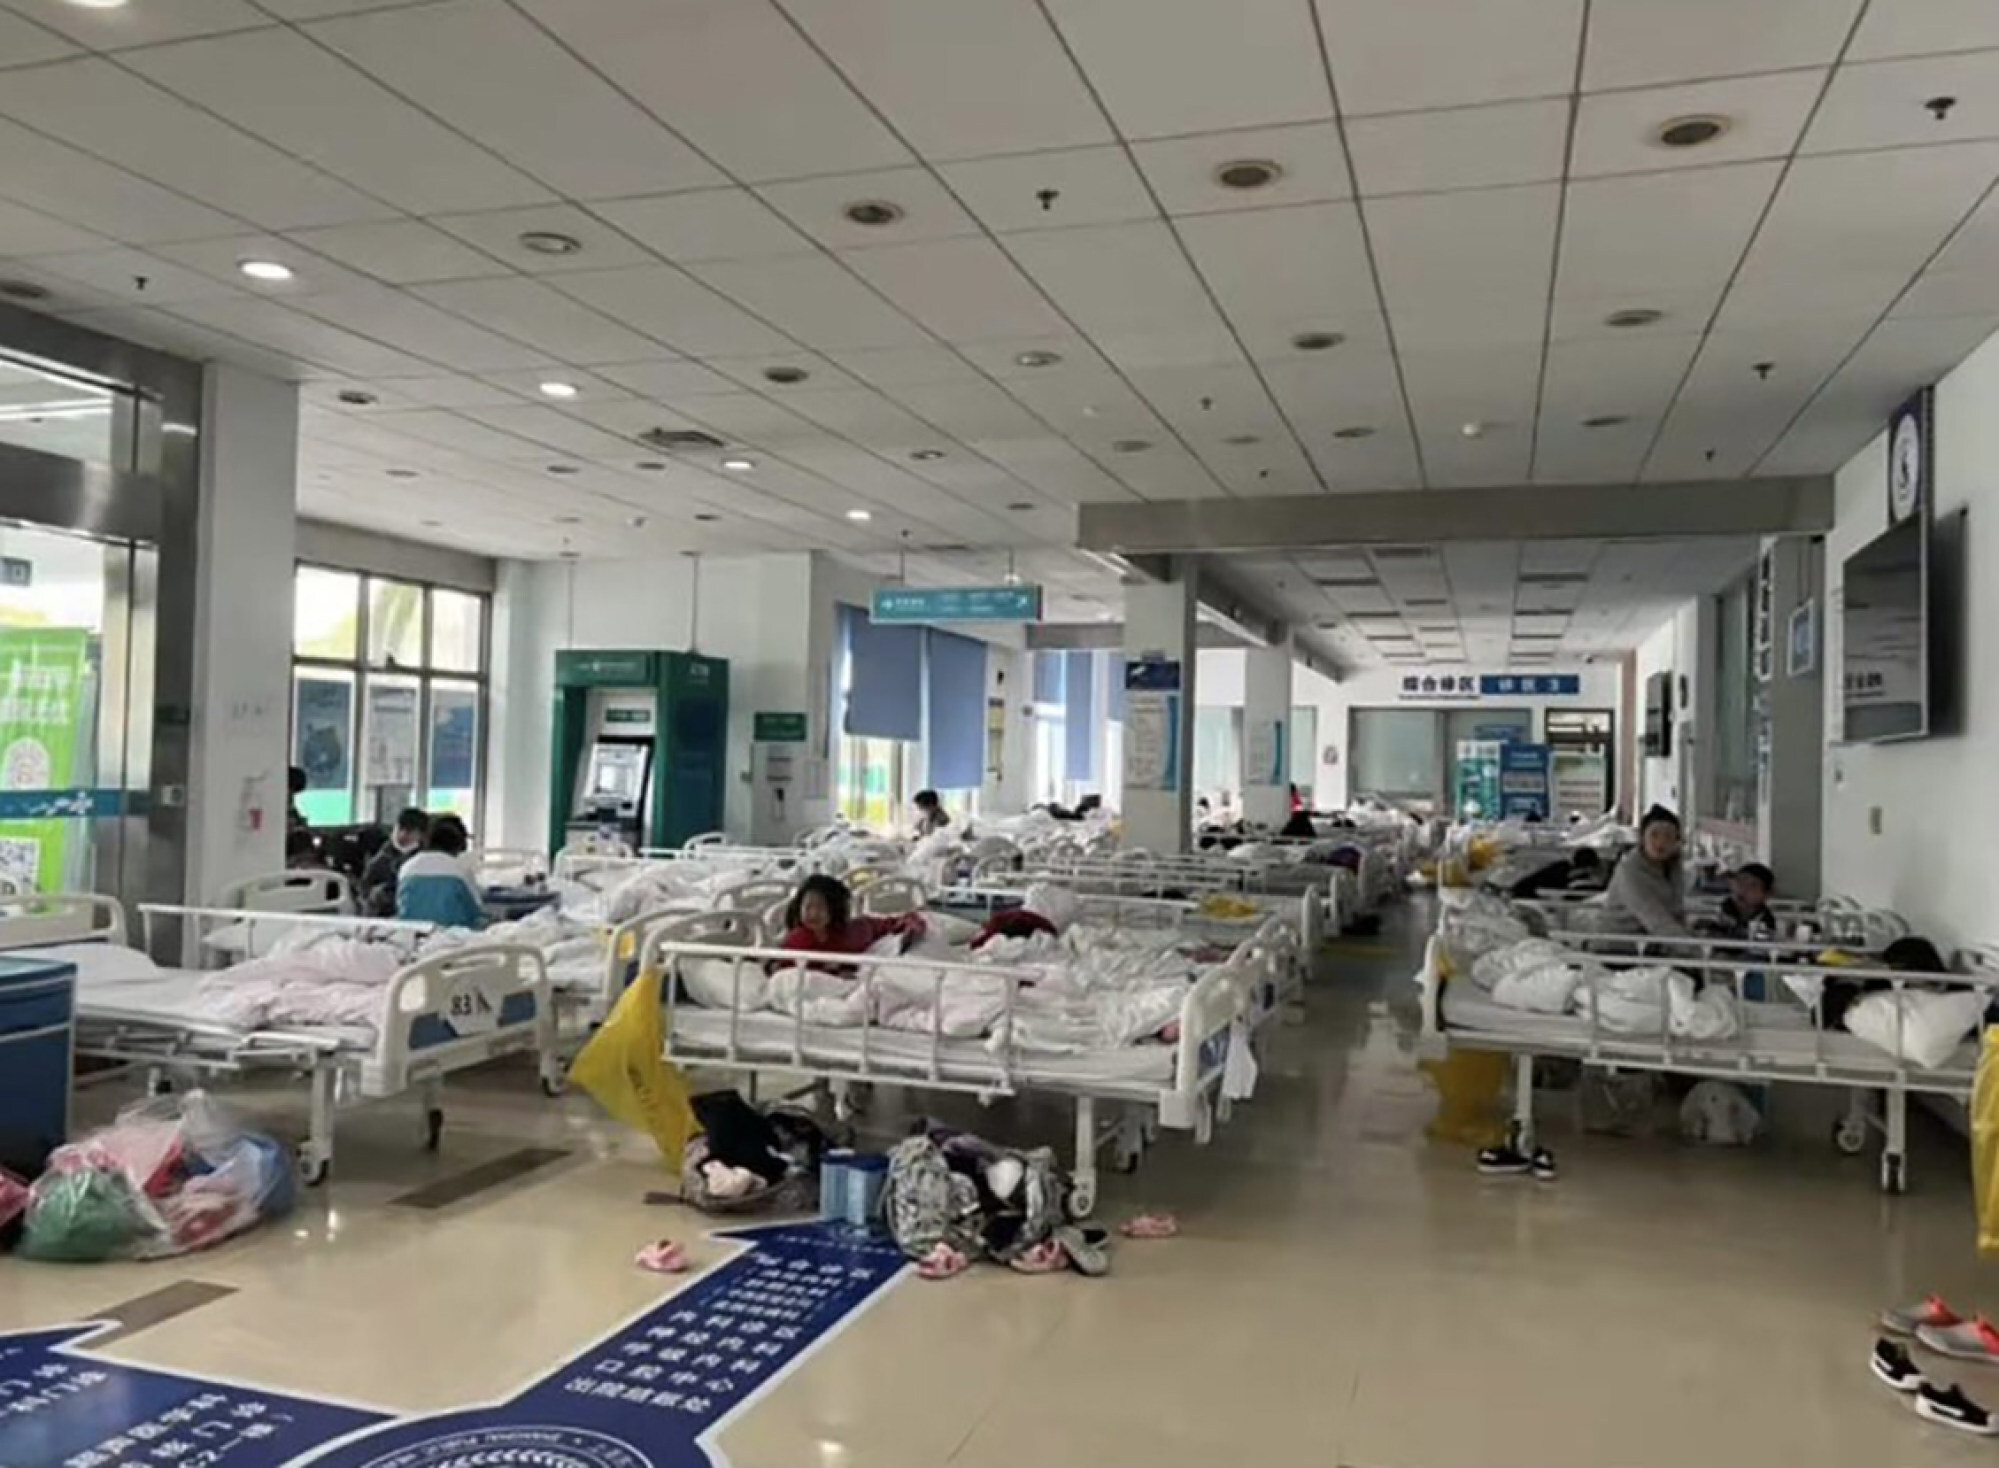 Footage of children in state-run wards at the Shanghai Public Health Clinical Centre was widely shared online. Photo: Twitter